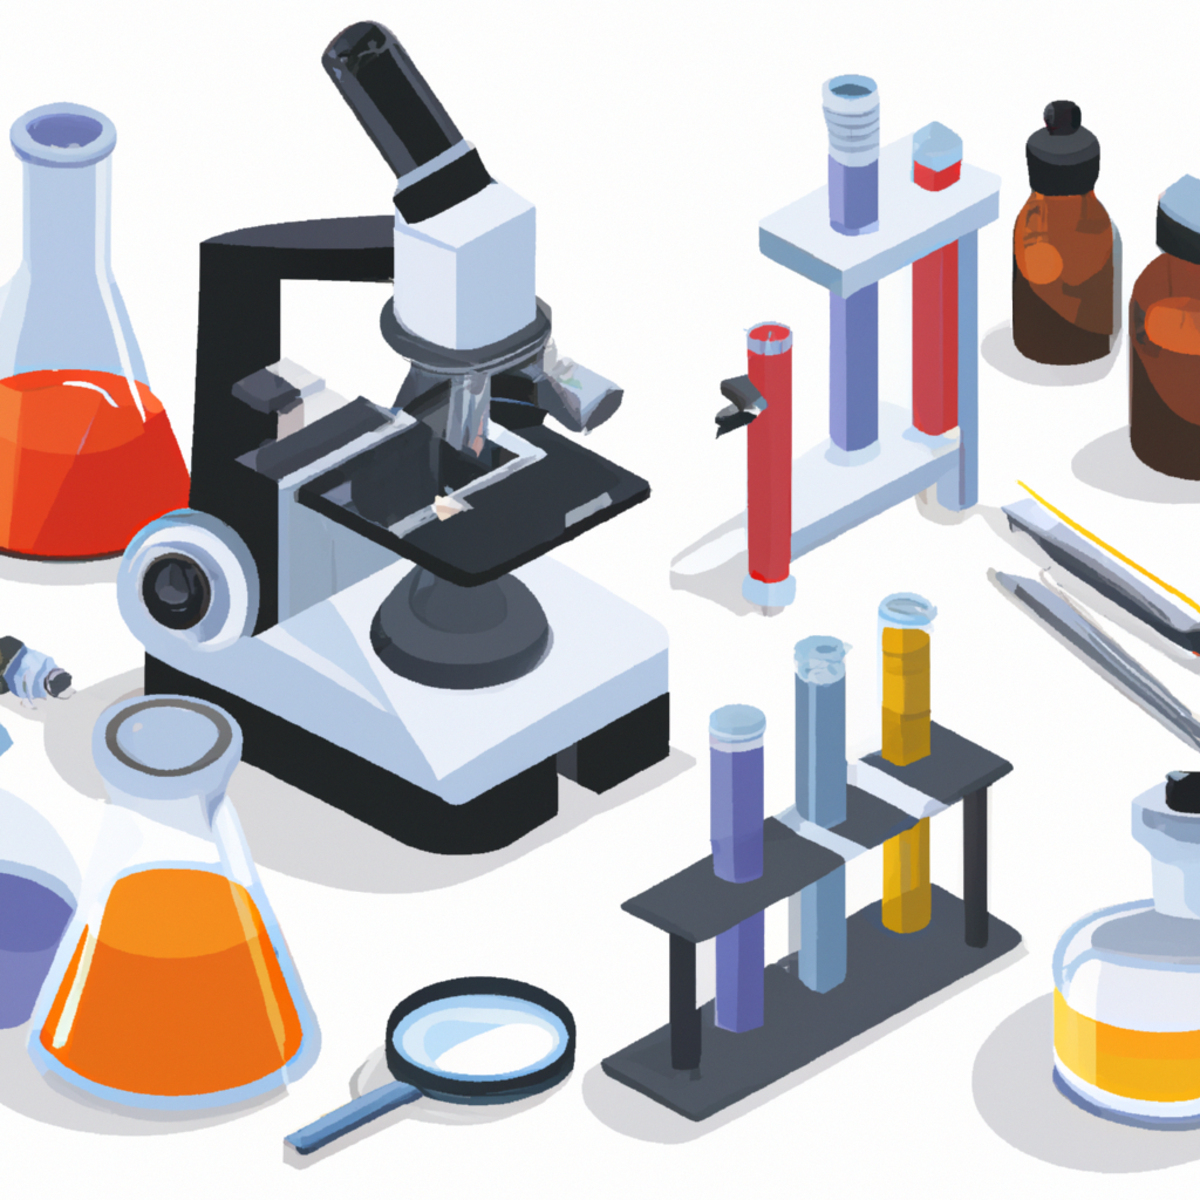 Medical equipment and laboratory tools arranged meticulously on a sterile white background, symbolizing the diagnostic process and scientific research involved in understanding Tyrosinemia.